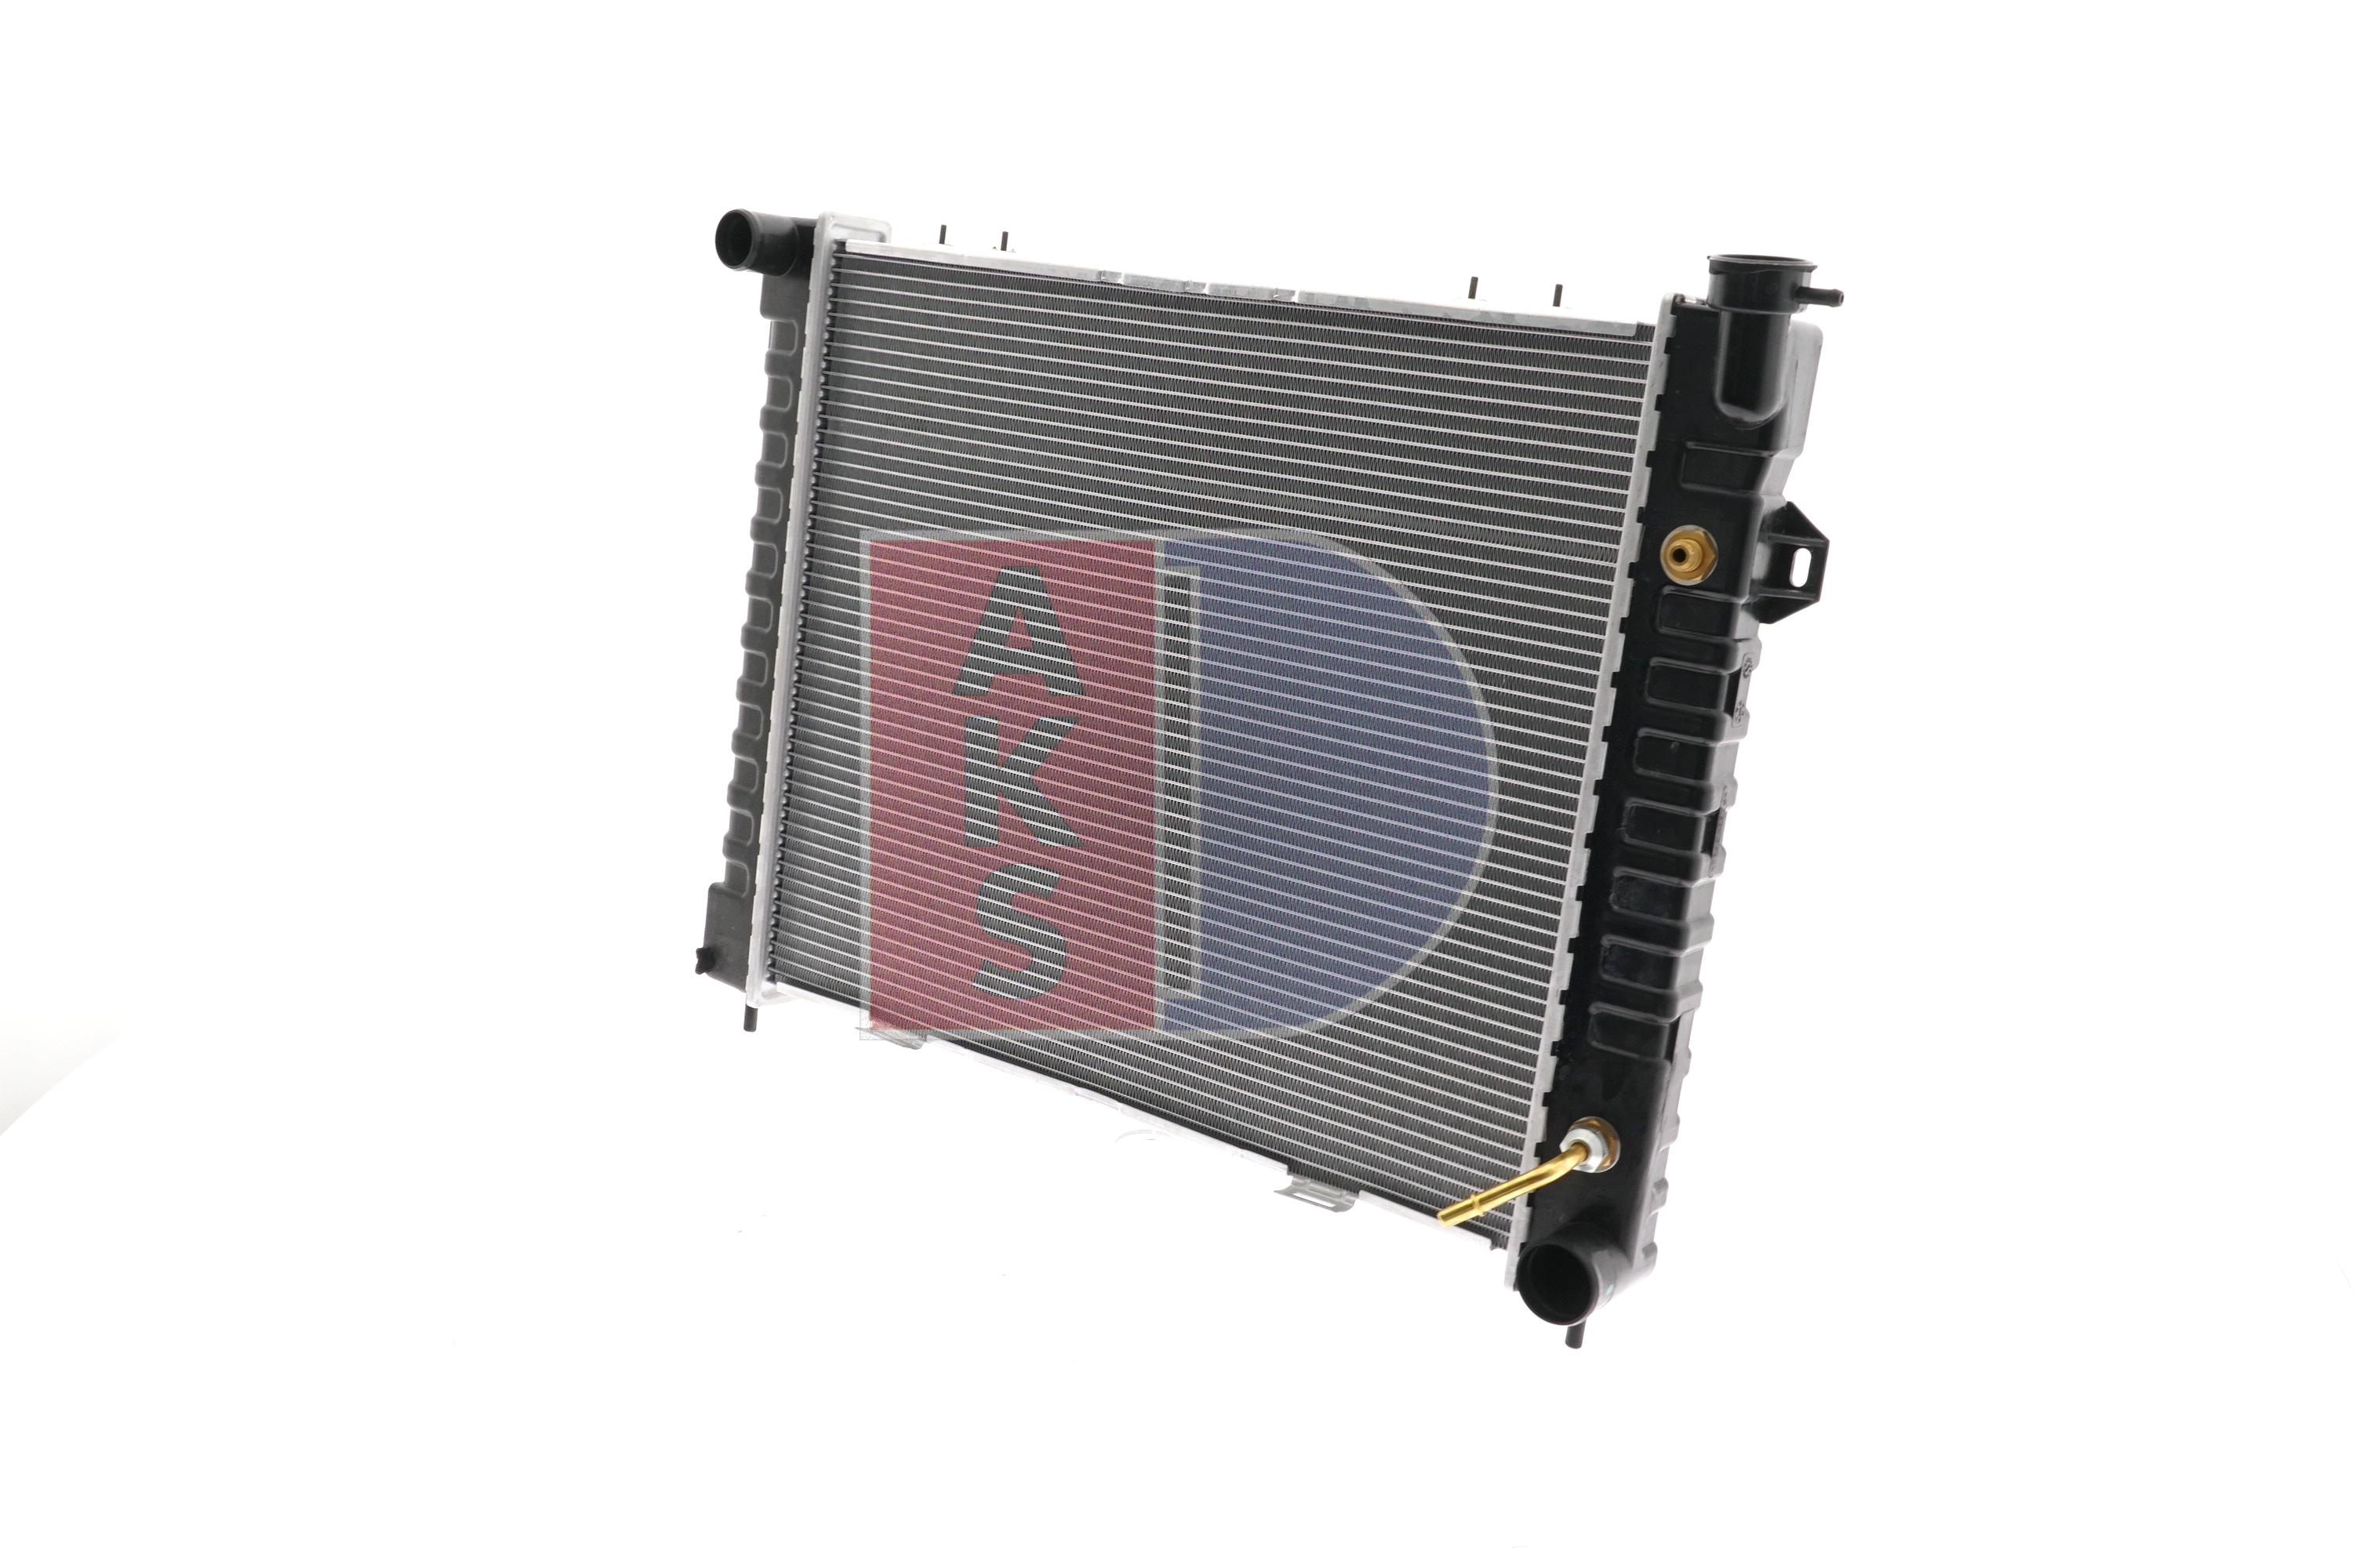 AKS DASIS 520490N Engine radiator Aluminium, for vehicles with air conditioning, 565 x 498 x 42 mm, Automatic Transmission, Brazed cooling fins